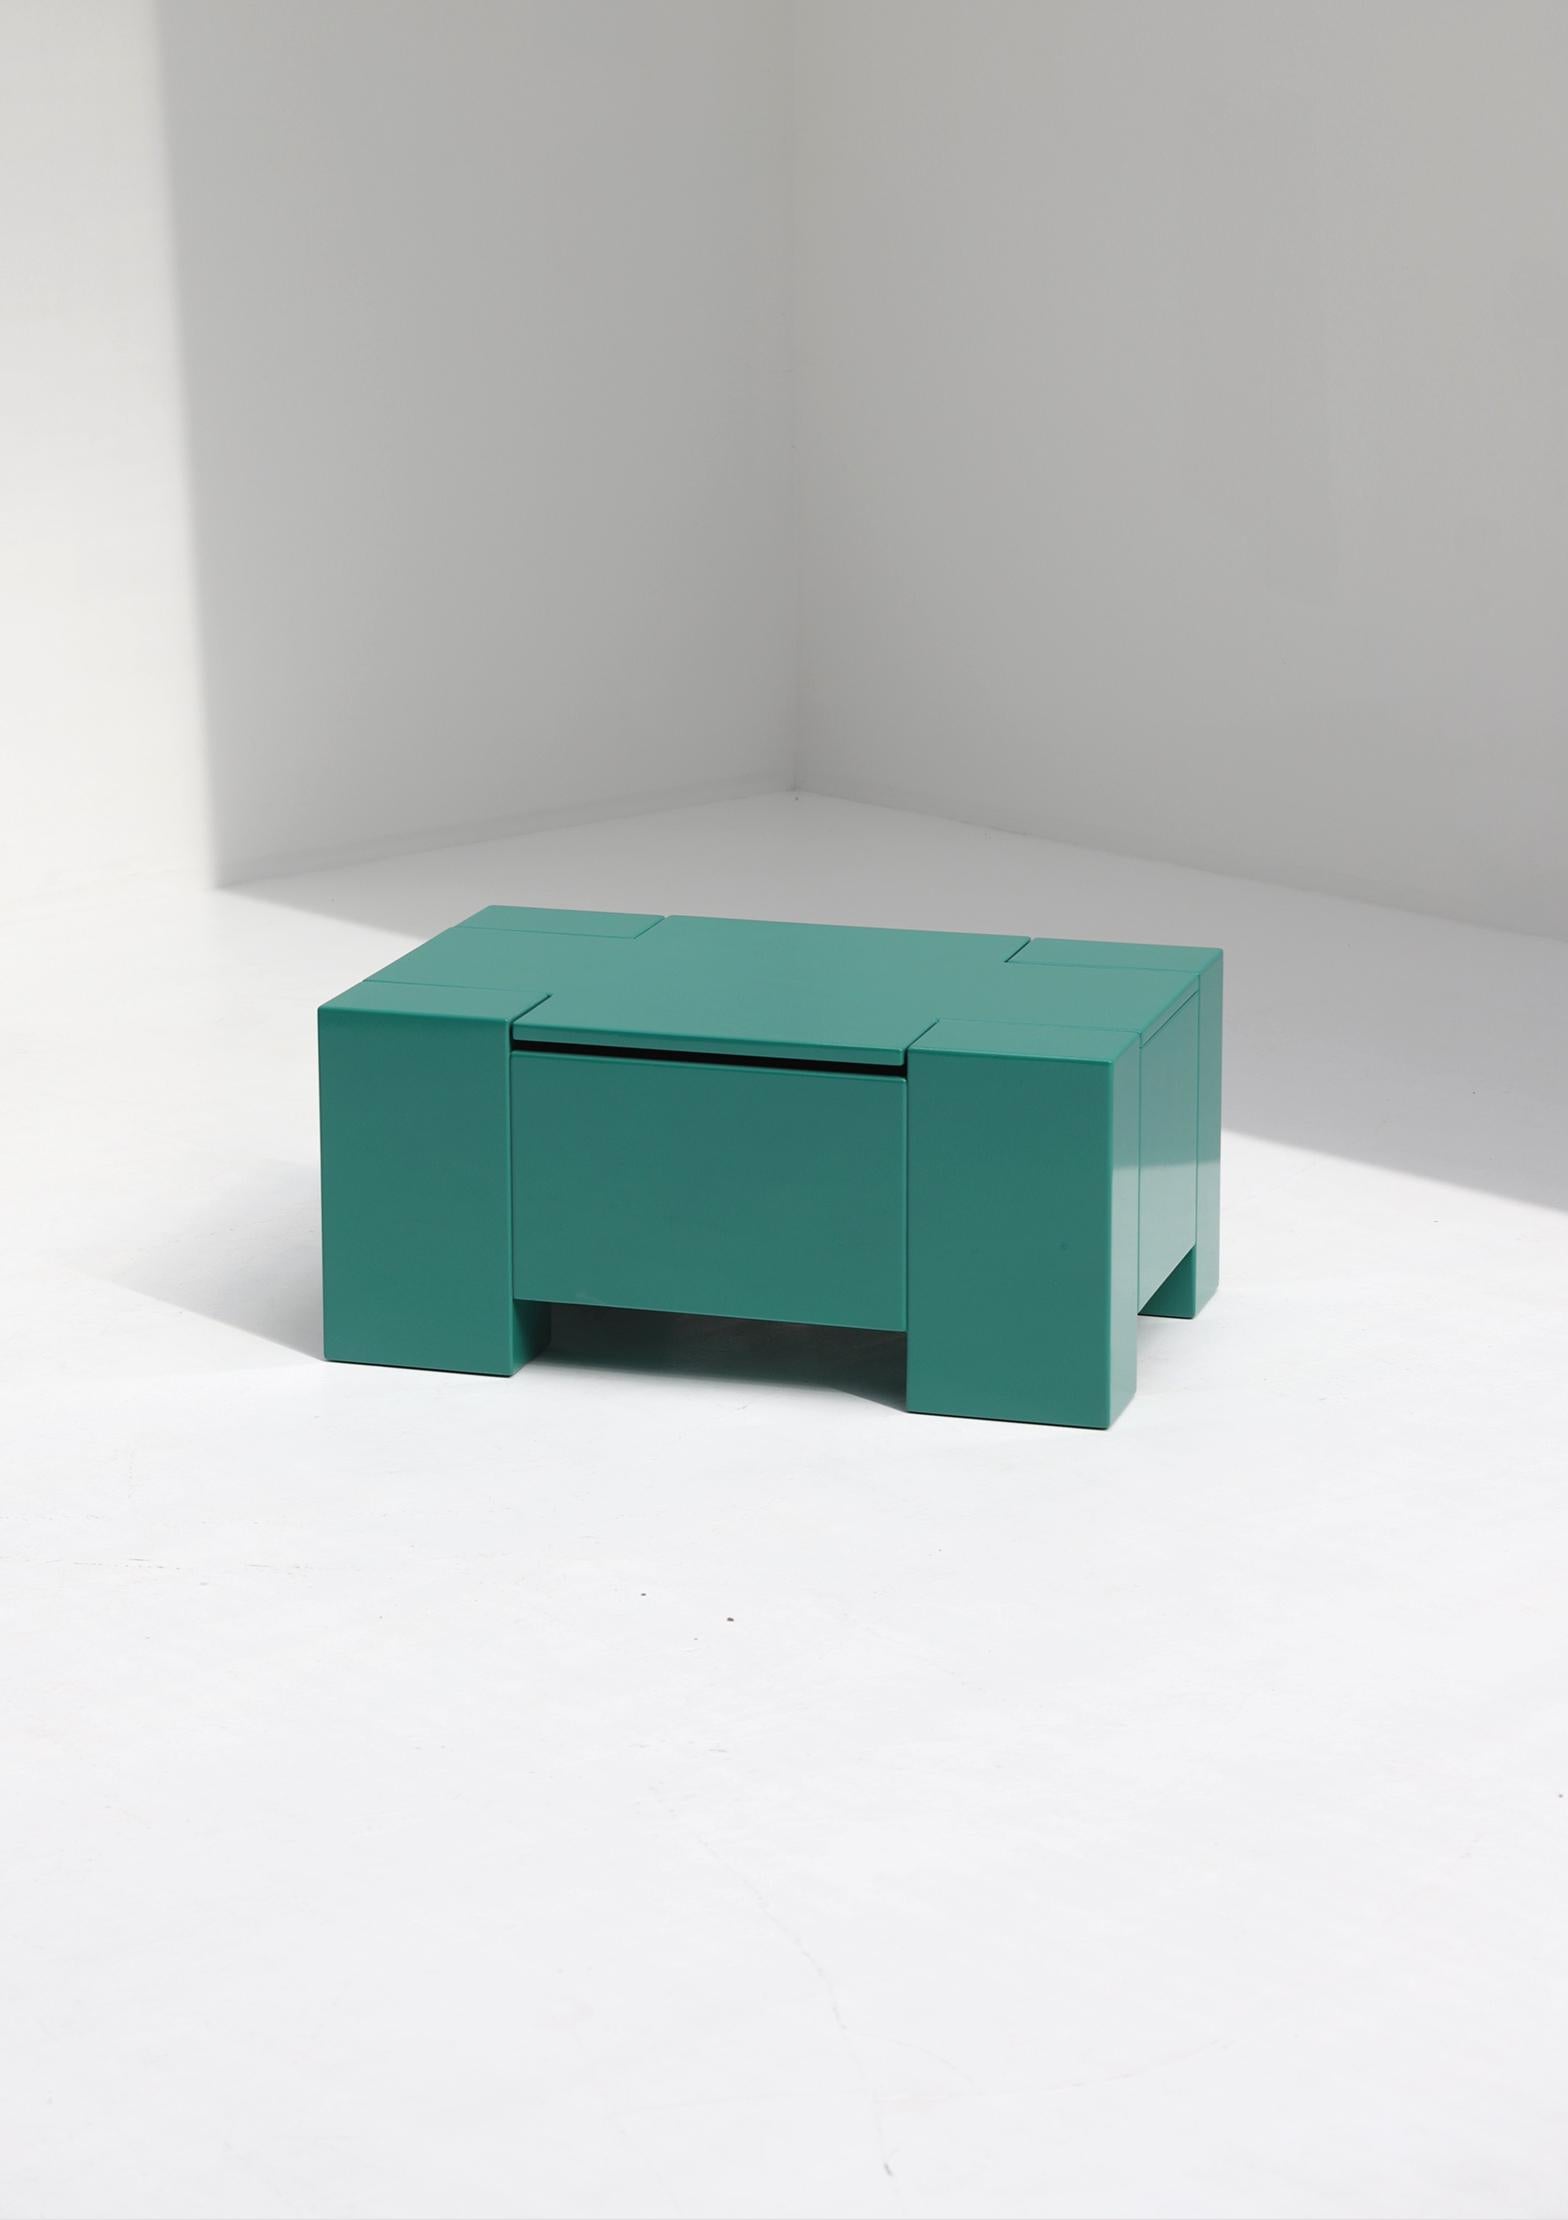 Colorful storage box designed and made in the 1970s. Besides being a practical item, this box can also be a colorful detail ideal for a (kids) room, living room or office space. The box is lacquered in a bright green and stands in a very good